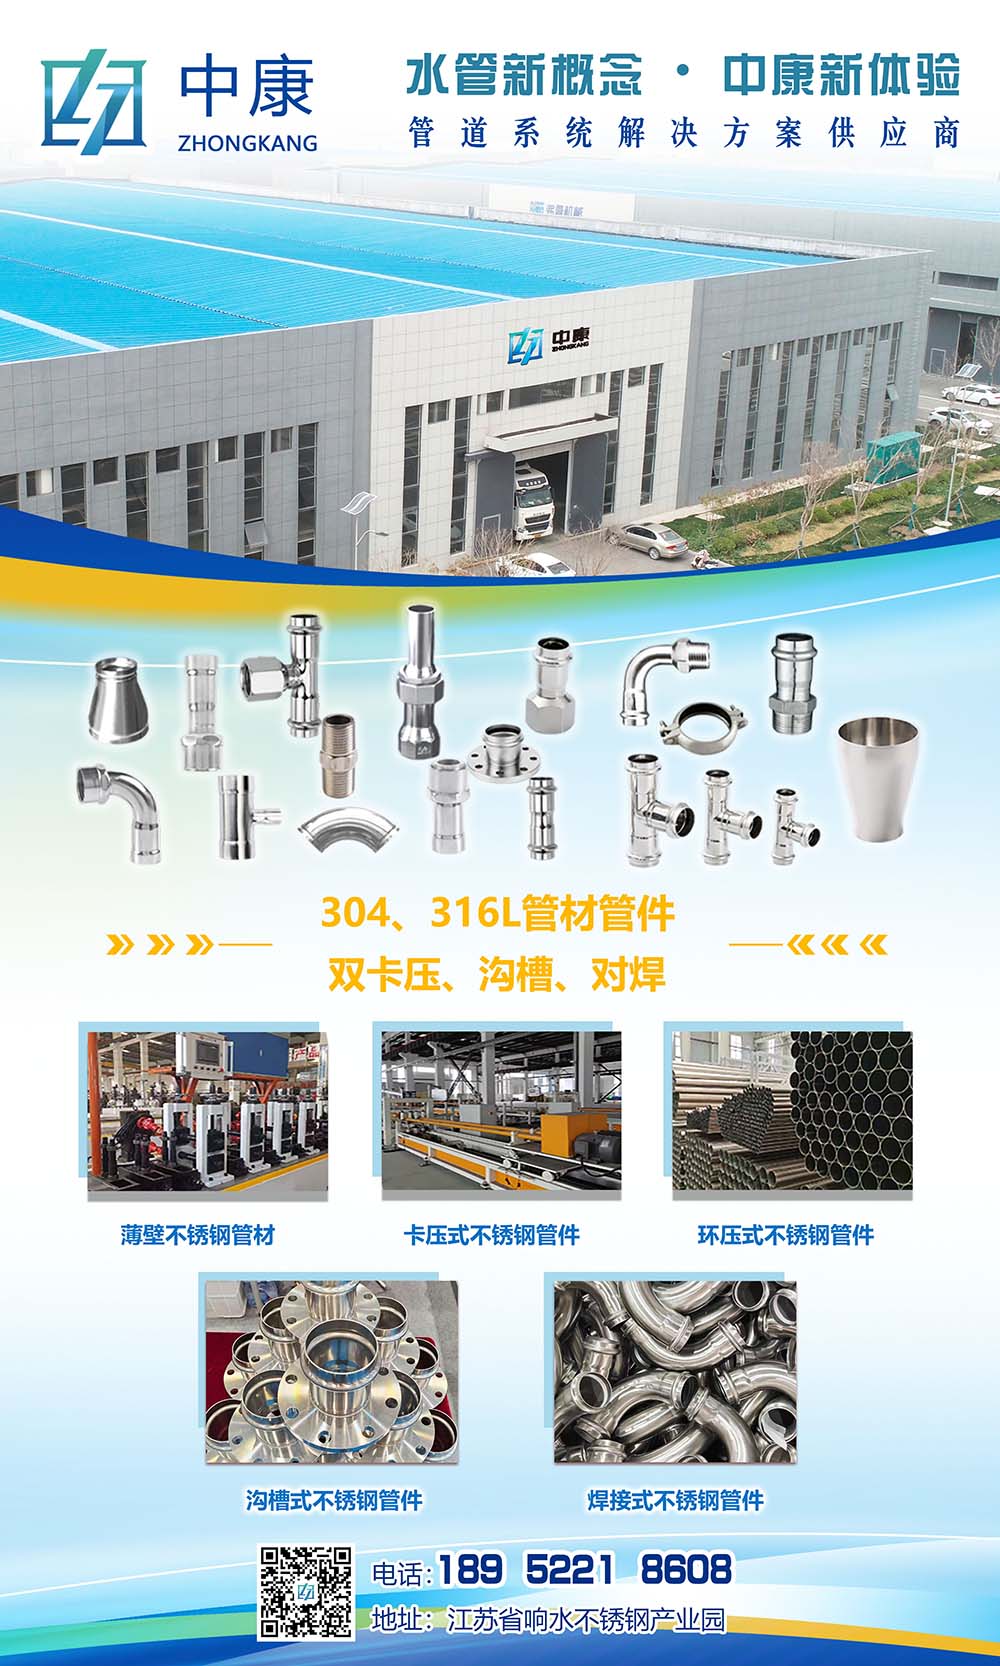 Stainless steel pipe and fittings export trend